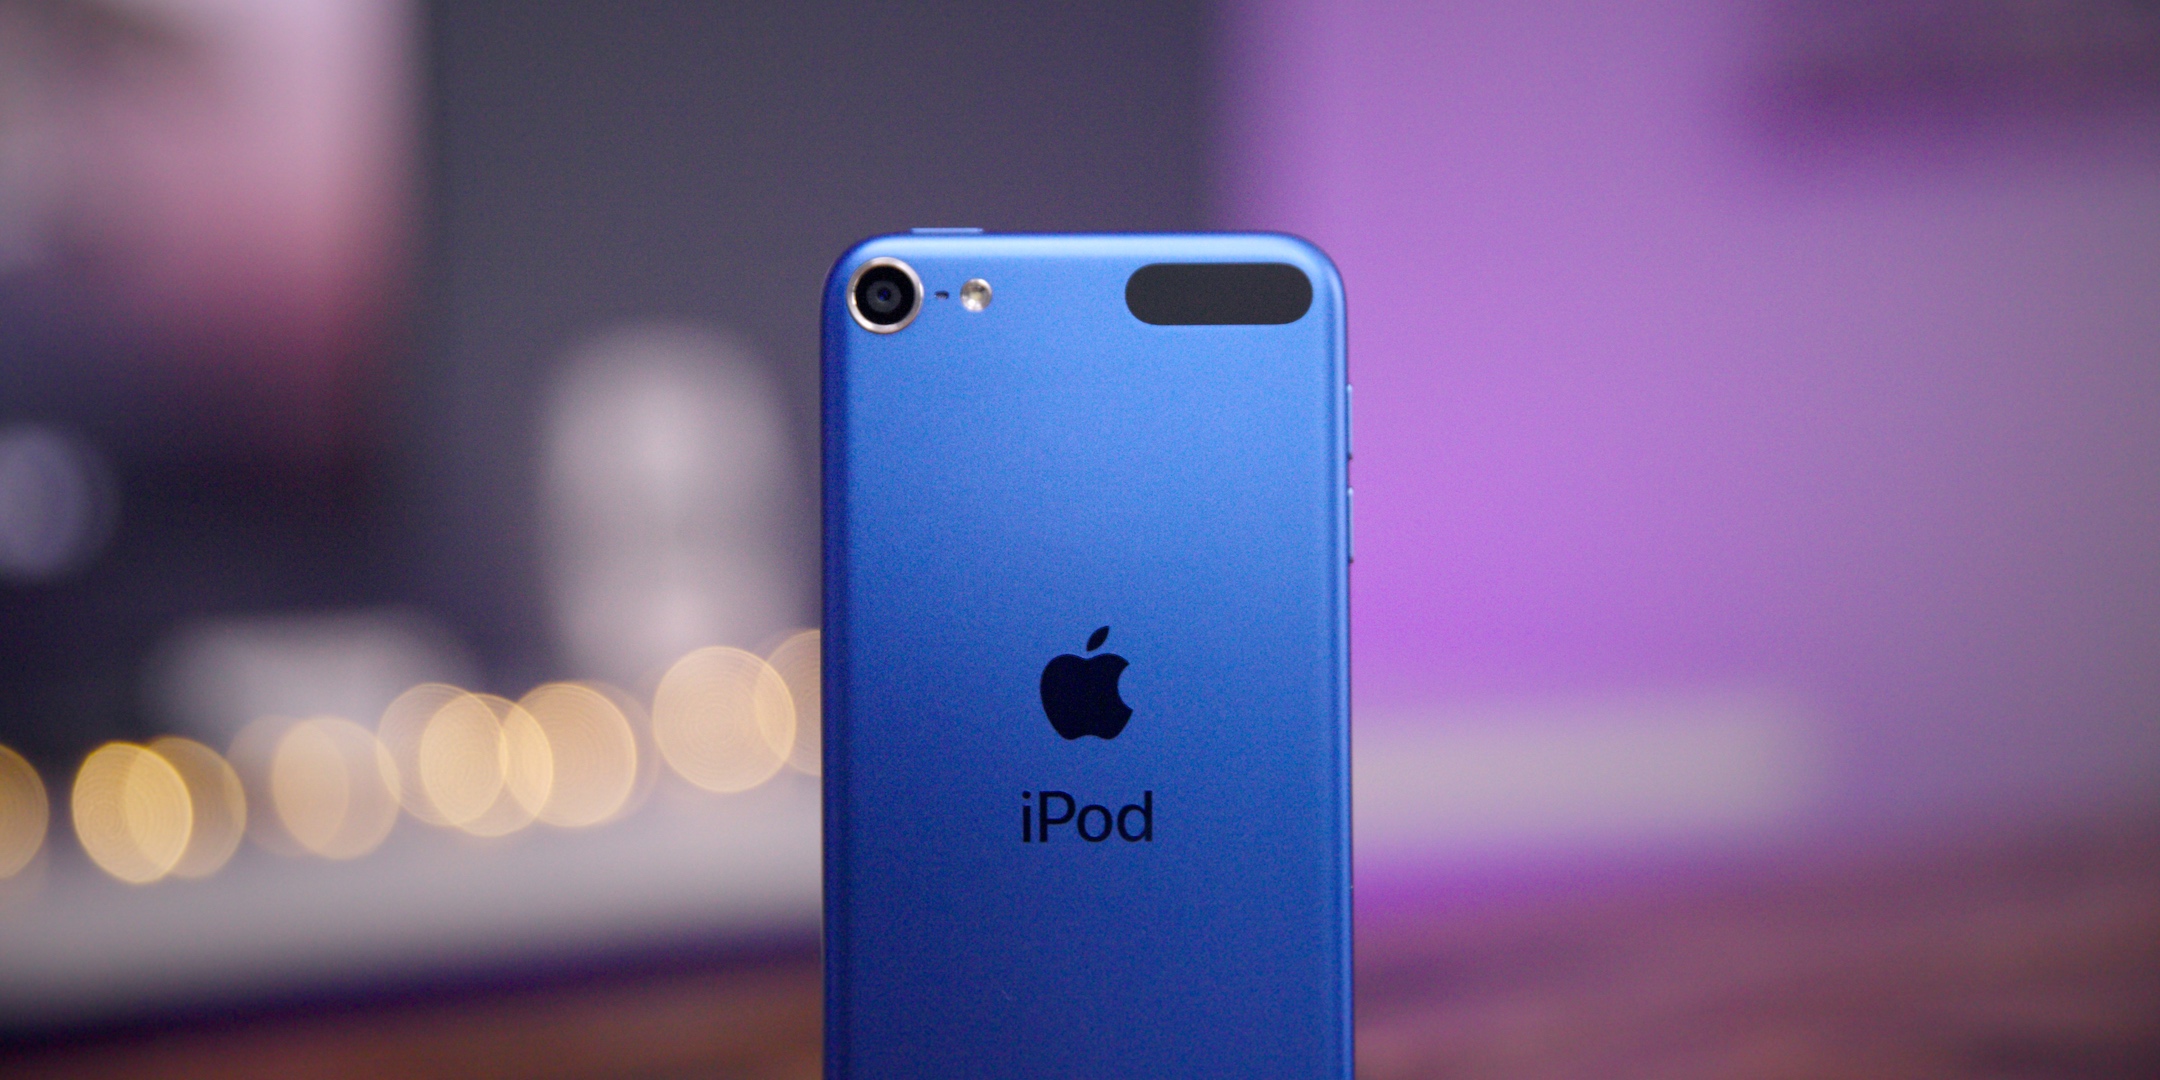 iPod touch: Updated With A10 Chip and More Storage